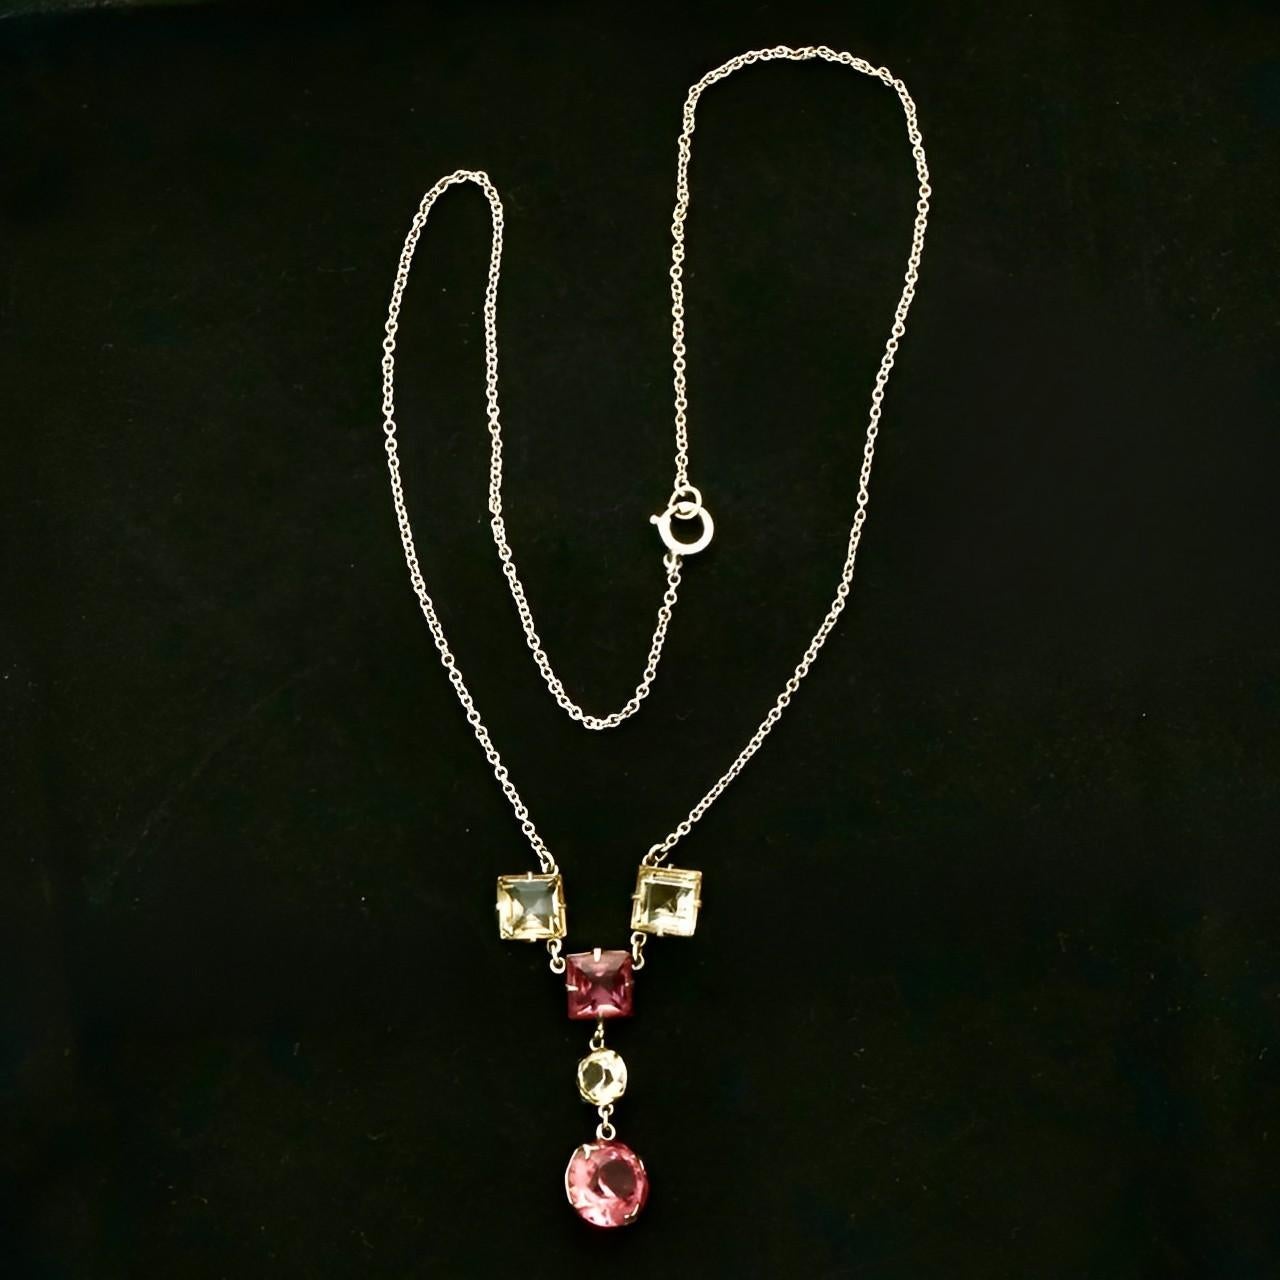 Art Deco Silver Tone Drop Pendant Necklace with Rouge Pink Clear Glass Crystals For Sale 1